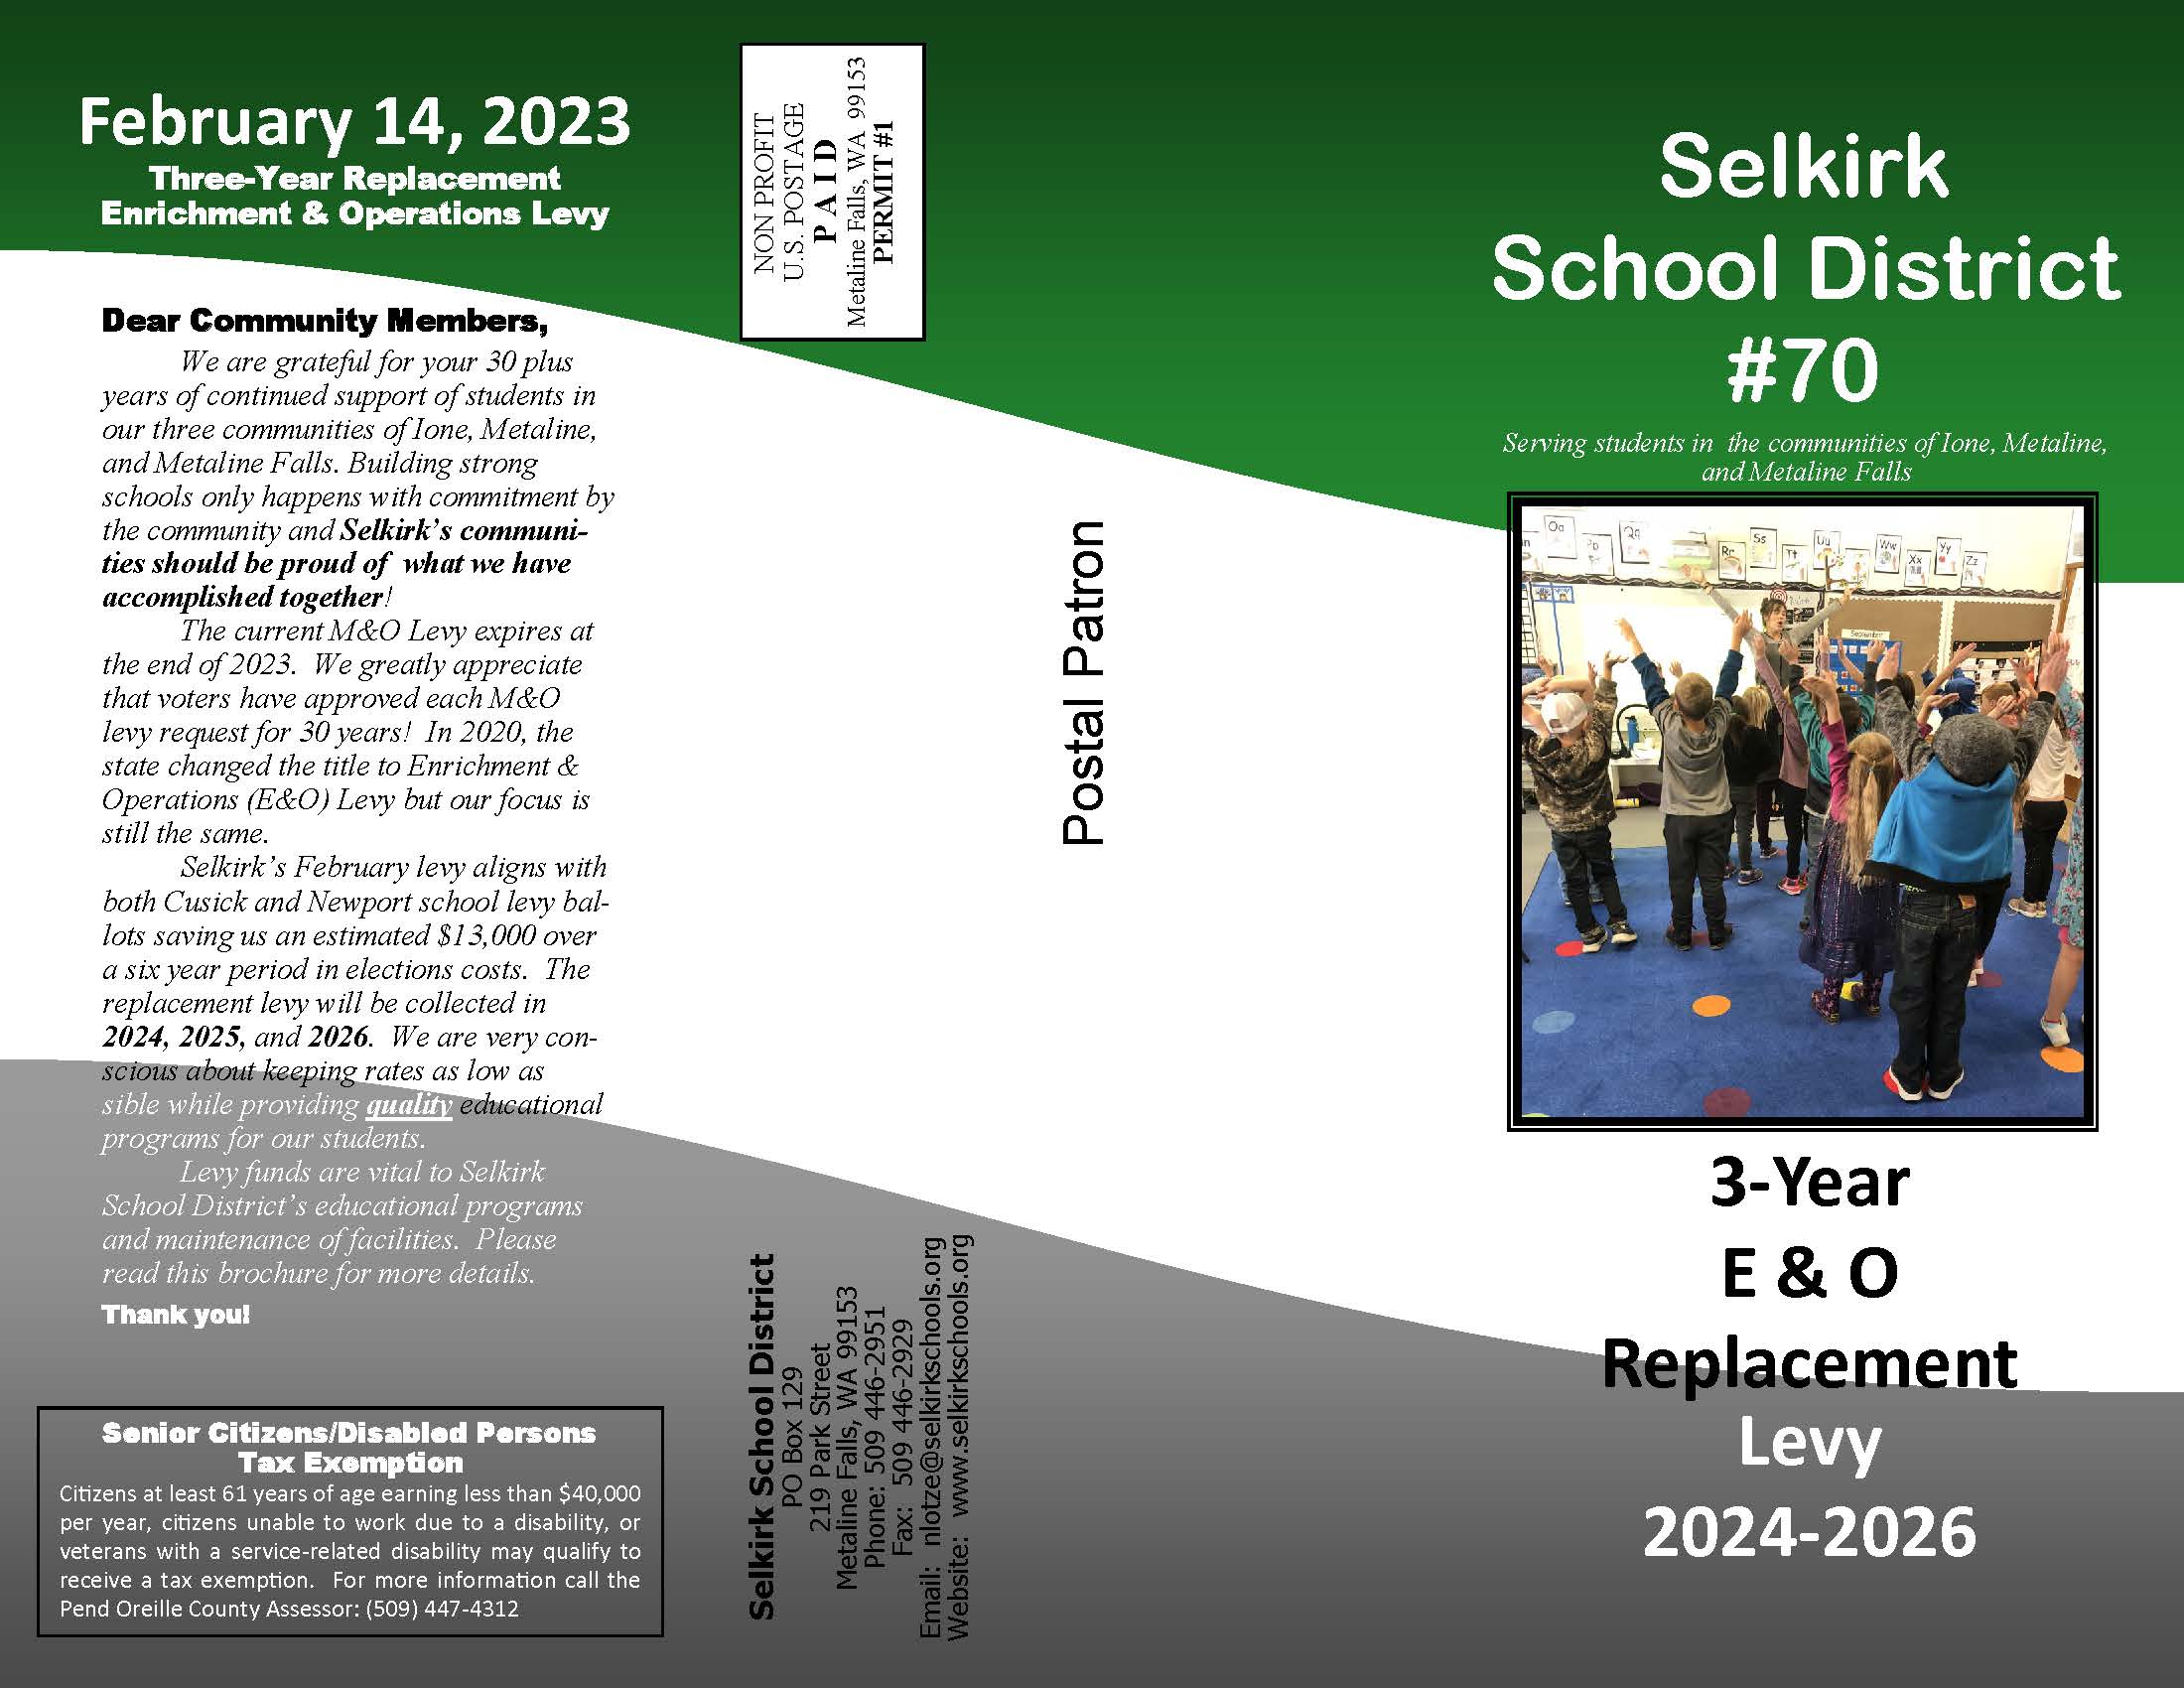 E & O Levy Selkirk School District